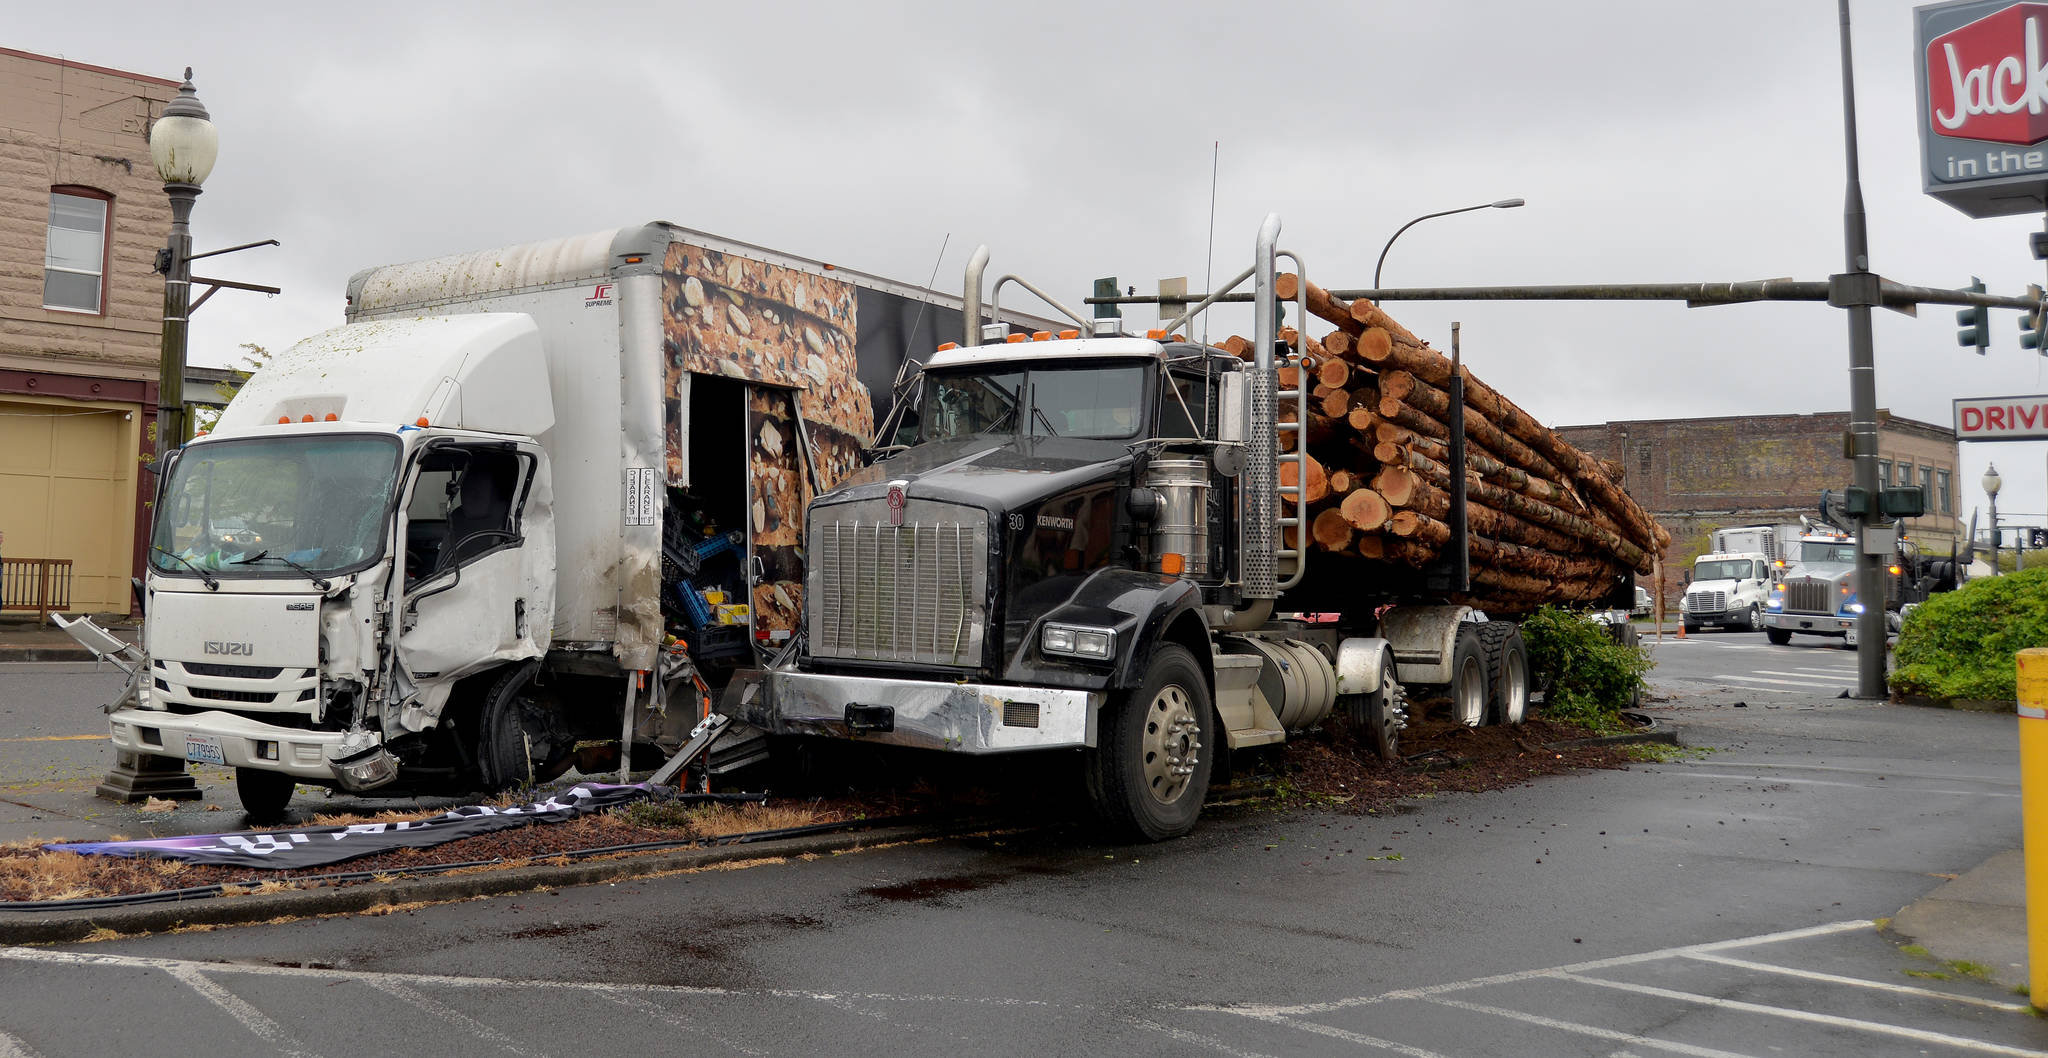 DAVE HAVILAND/THE DAILY WORLD
A box truck driver was transported from the scene for medical evaluation after police say he failed to stop at a flashing red light and collided with a log truck early Monday morning.